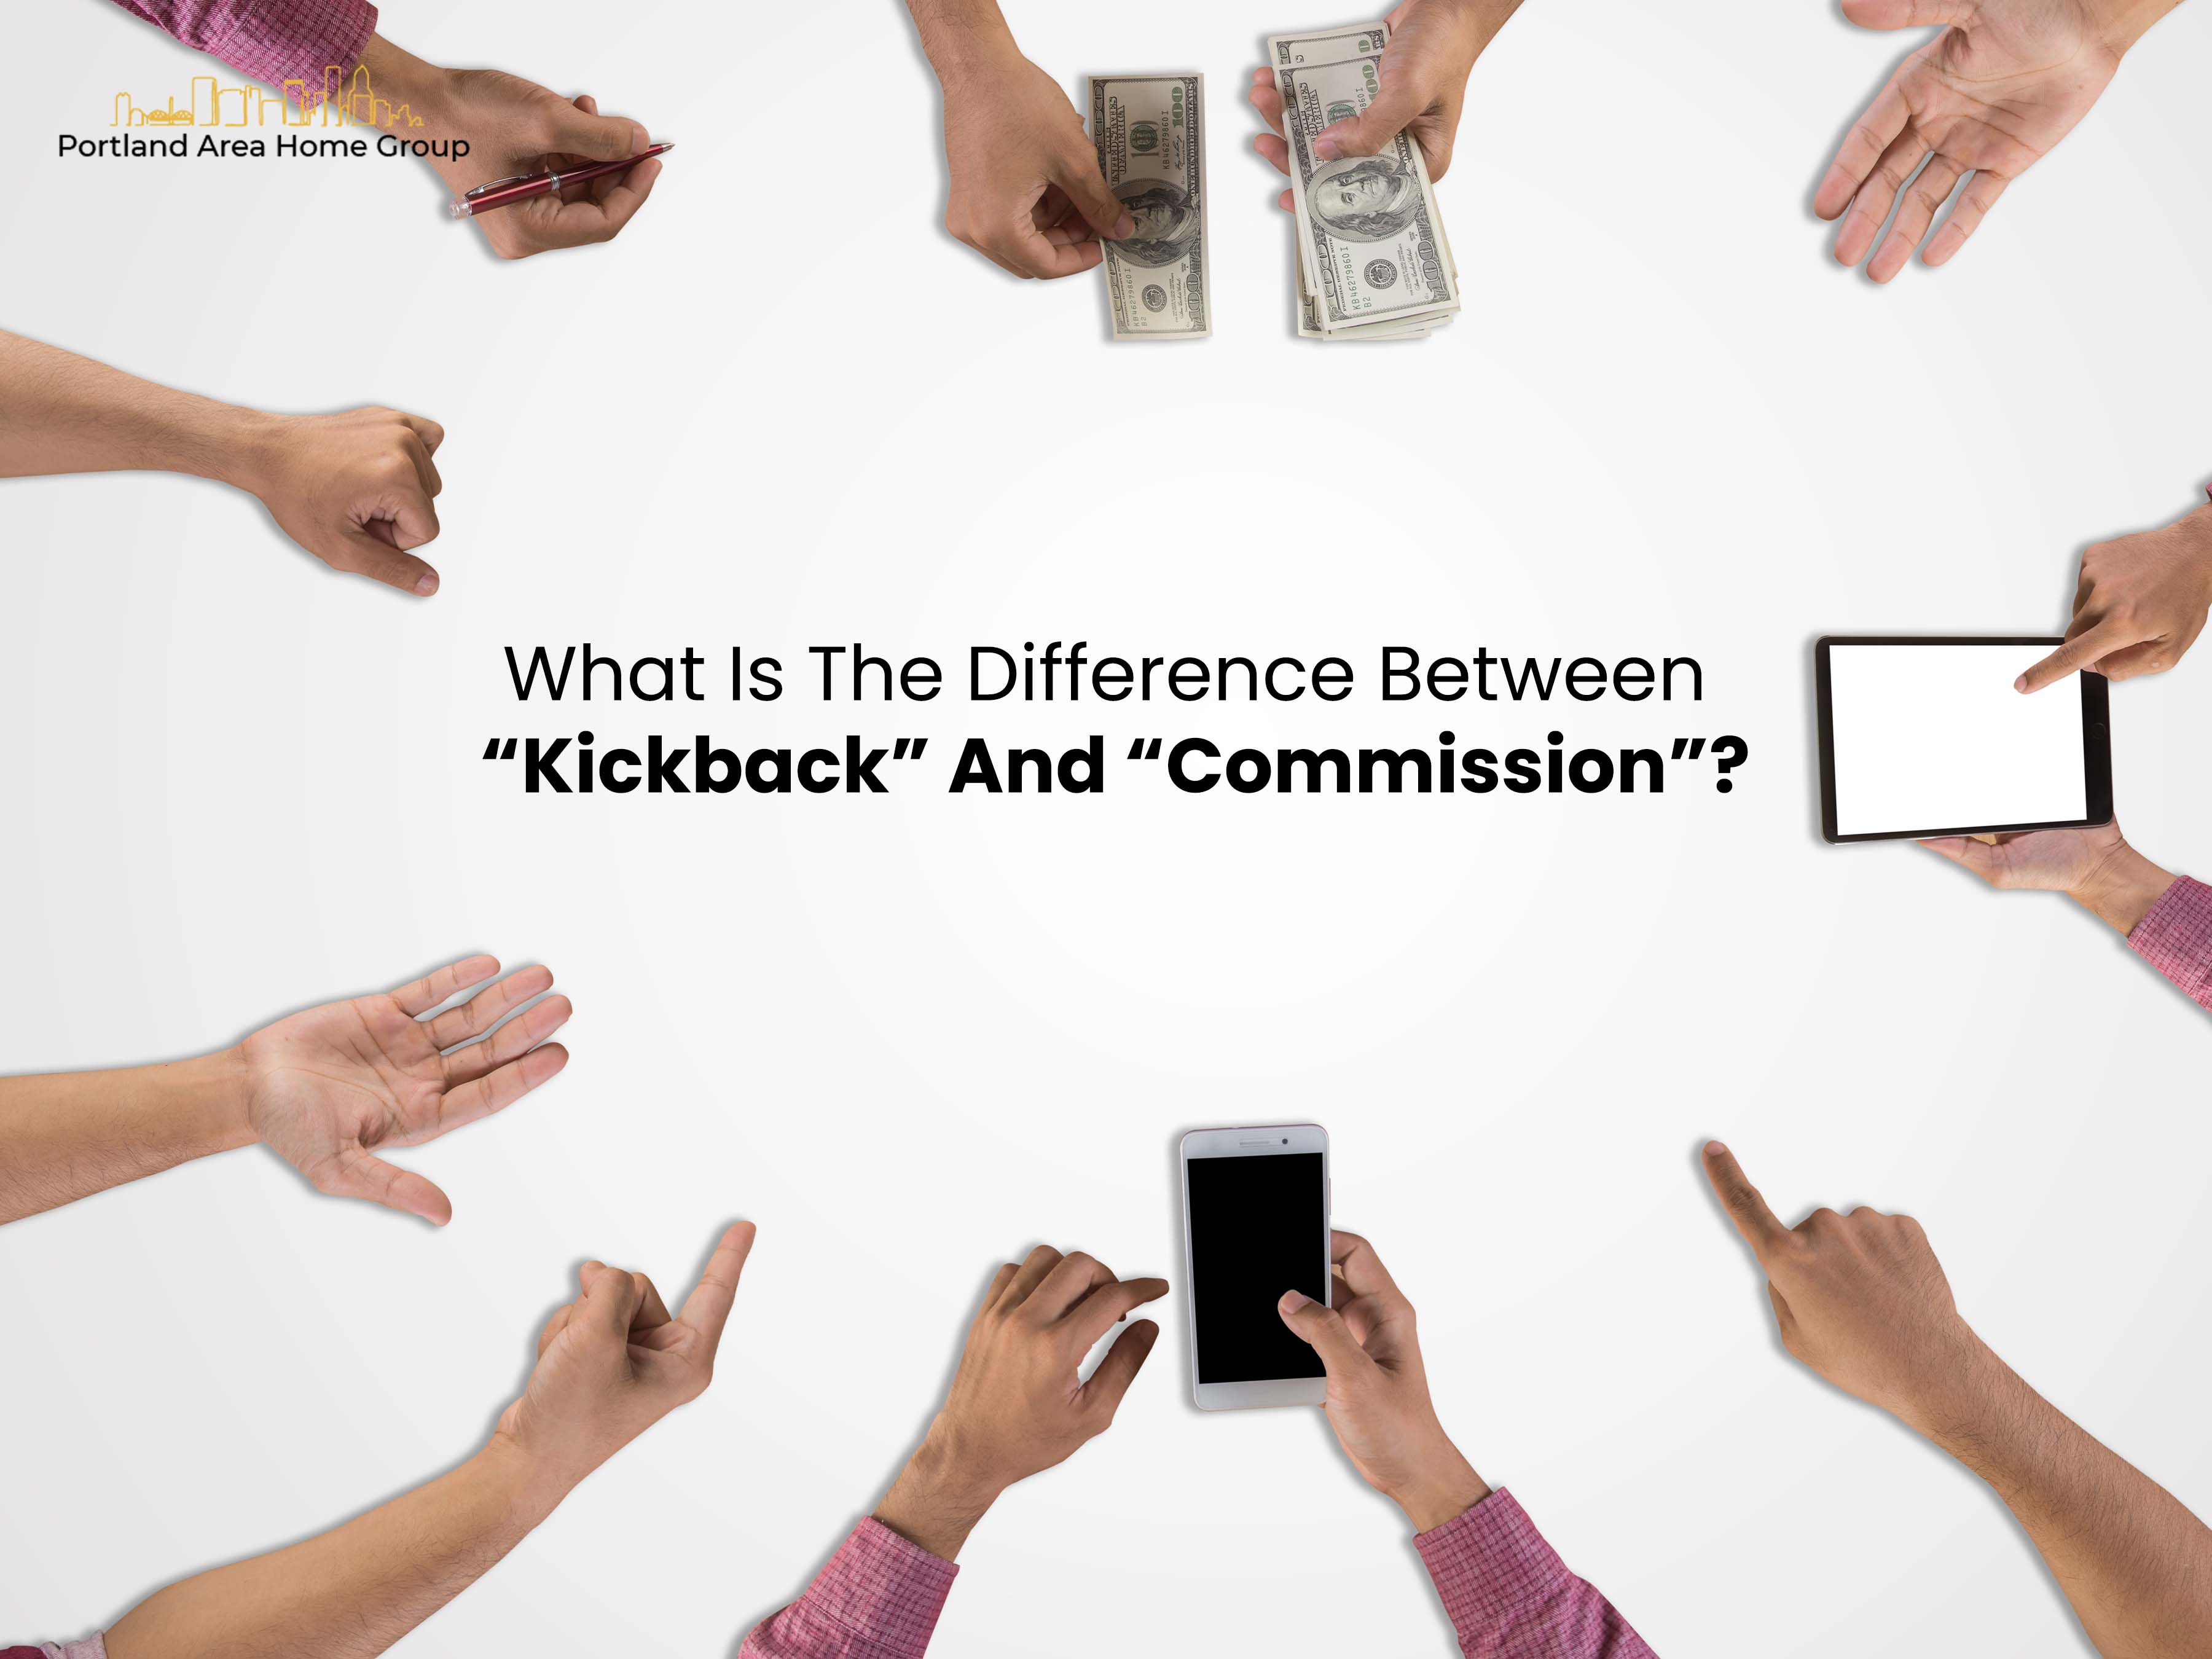 What Is The Difference Between “Kickback” And “Commission”?